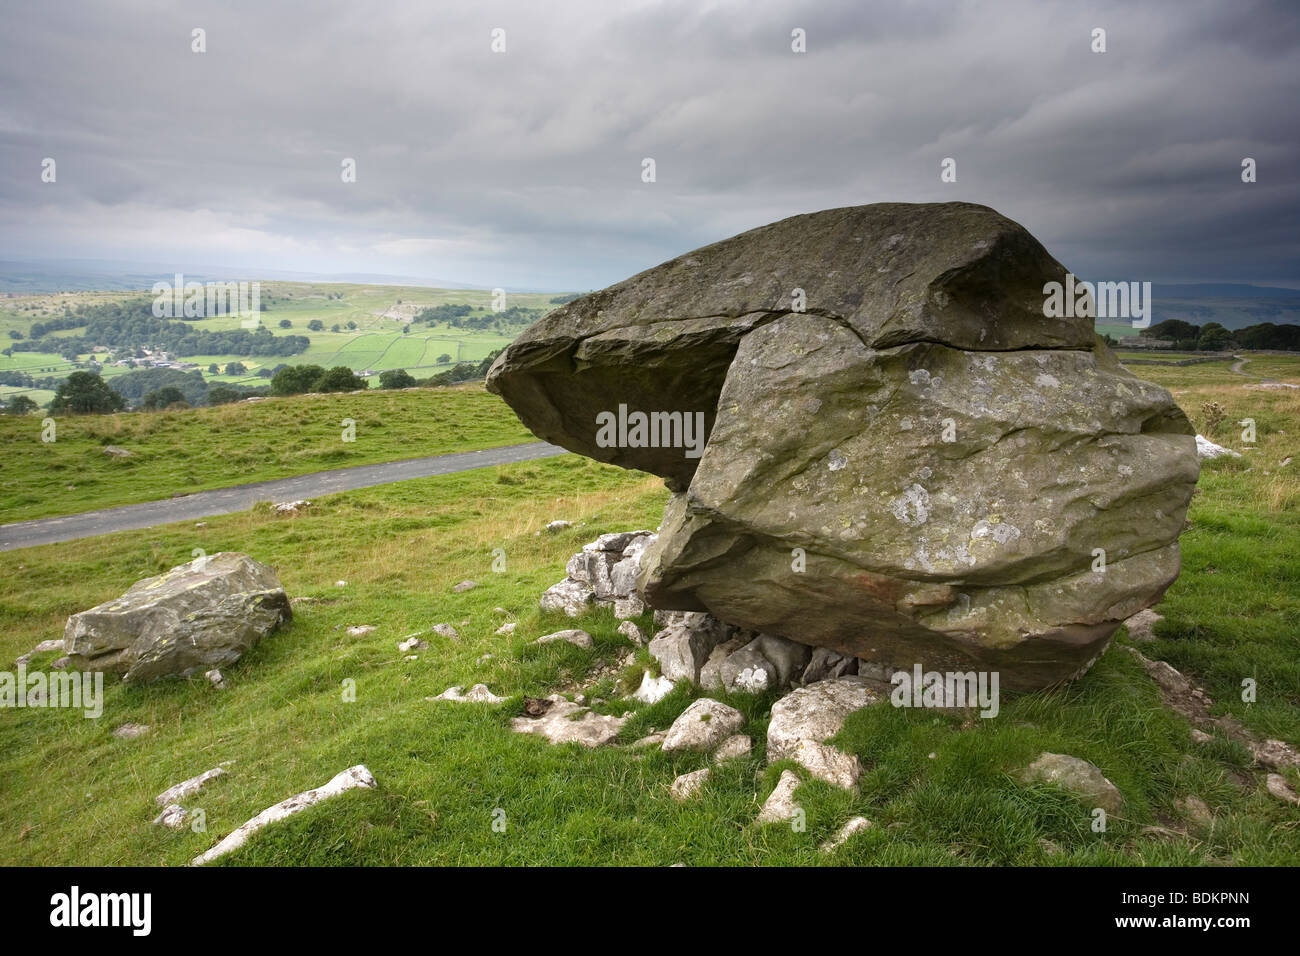 Erratic Boulder overlooking the Winskill Stones nature reserve in the Yorkshire Dales, United Kingdom Stock Photo